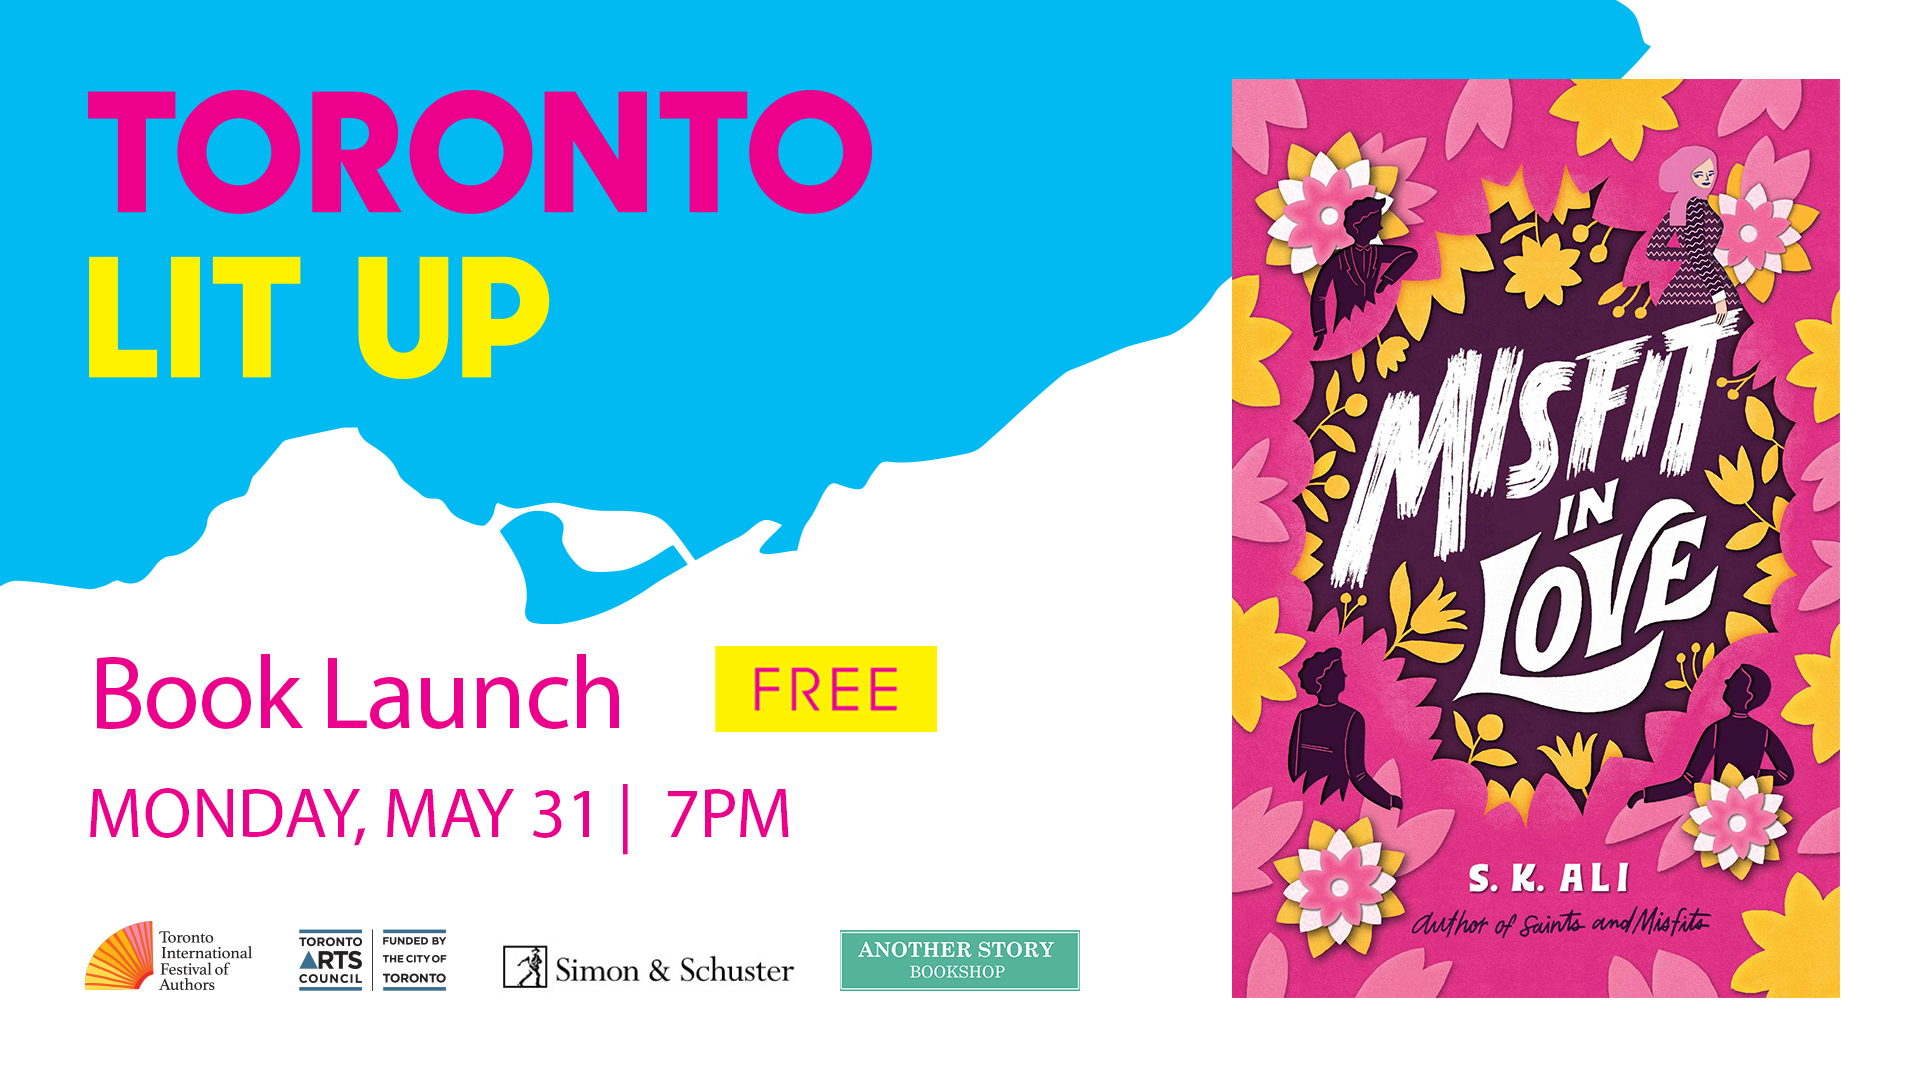 Toronto Lit Up banner with the book cover of Misfits in Love and "Book Launch Free Monday May 31 7pm". Includes TIFA, Toronto Arts Council, Simon and Schuster, Another Story Bookshop logos